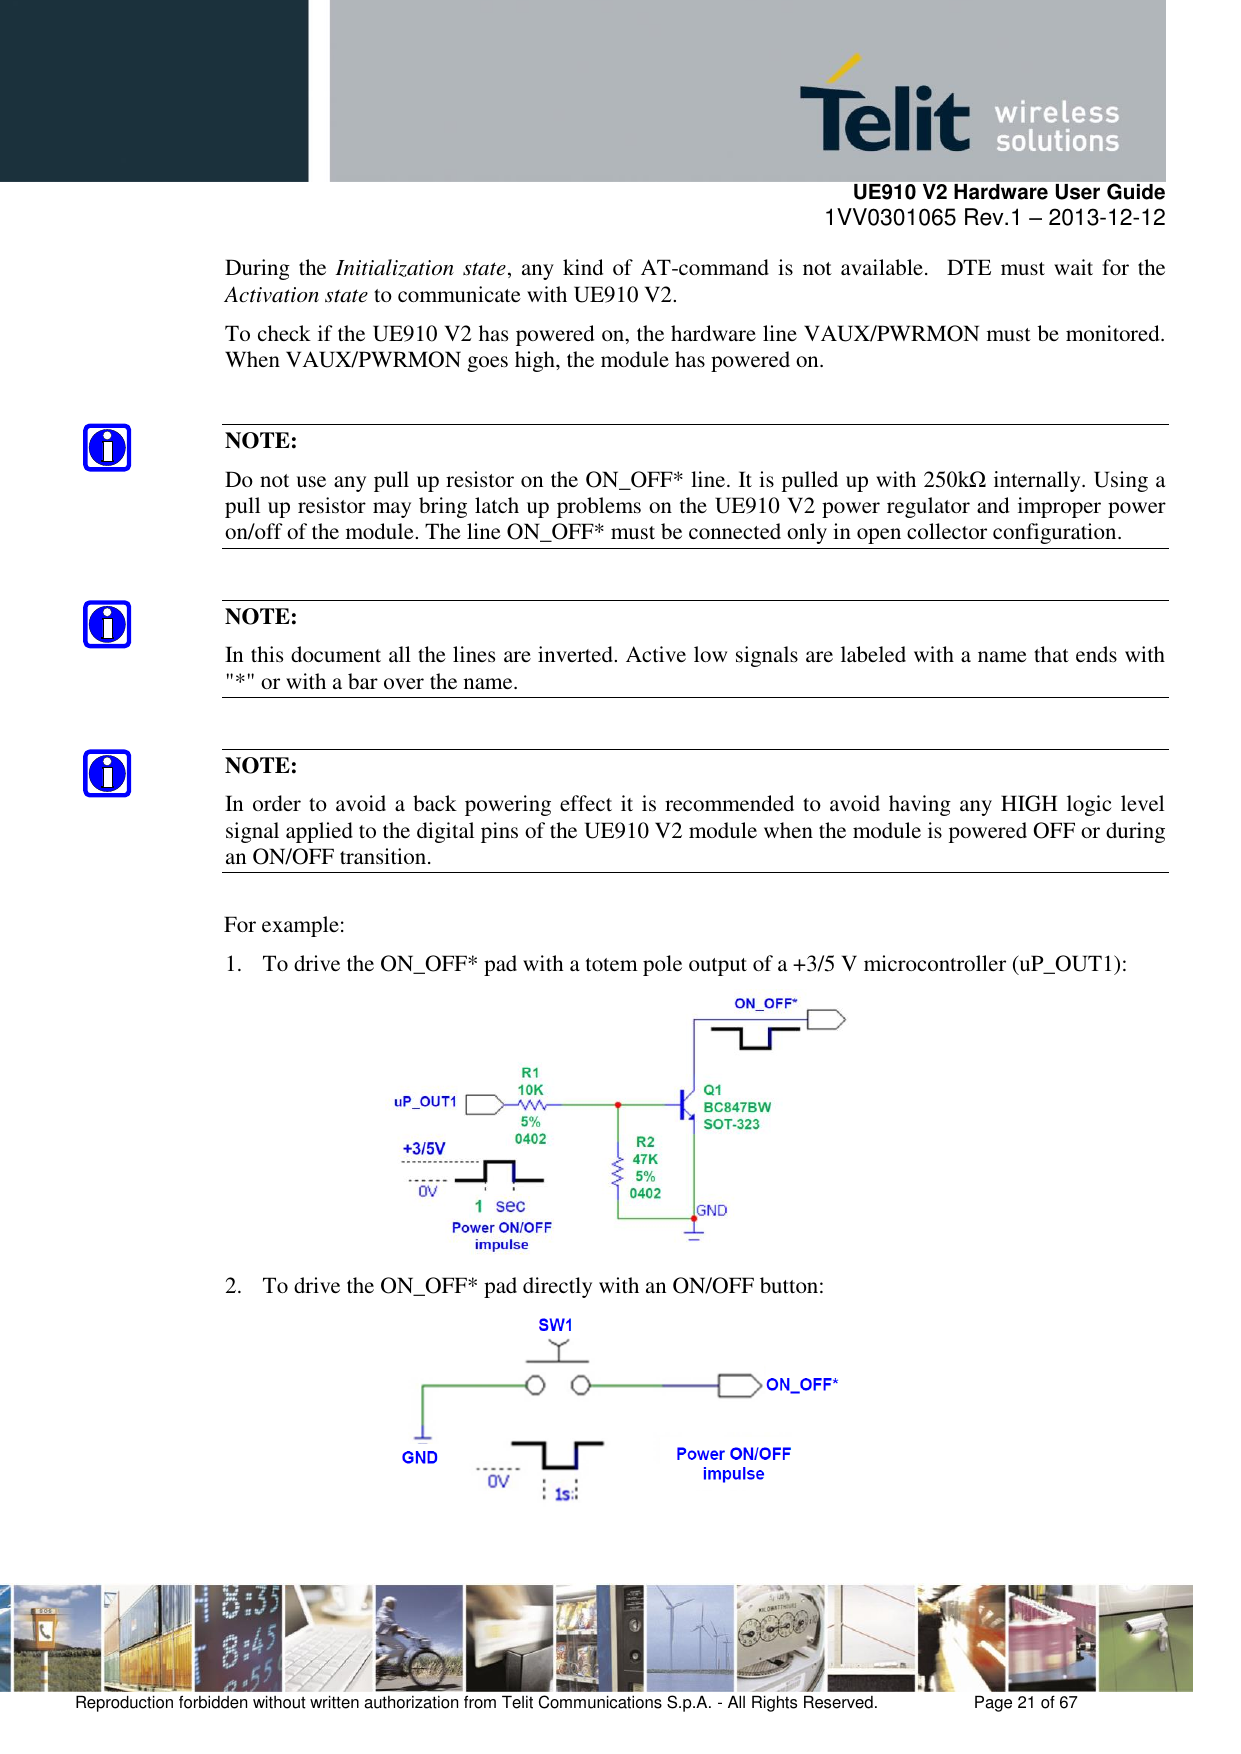     UE910 V2 Hardware User Guide 1VV0301065 Rev.1 – 2013-12-12  Reproduction forbidden without written authorization from Telit Communications S.p.A. - All Rights Reserved.    Page 21 of 67                                                     During the Initialization state, any kind  of  AT-command is not available.  DTE must wait for the Activation state to communicate with UE910 V2. To check if the UE910 V2 has powered on, the hardware line VAUX/PWRMON must be monitored. When VAUX/PWRMON goes high, the module has powered on.  NOTE: Do not use any pull up resistor on the ON_OFF* line. It is pulled up with 250kΩ internally. Using a pull up resistor may bring latch up problems on the UE910 V2 power regulator and improper power on/off of the module. The line ON_OFF* must be connected only in open collector configuration.  NOTE: In this document all the lines are inverted. Active low signals are labeled with a name that ends with &quot;*&quot; or with a bar over the name.  NOTE: In order to avoid a back powering effect it is recommended to avoid having any HIGH logic level signal applied to the digital pins of the UE910 V2 module when the module is powered OFF or during an ON/OFF transition.  For example: 1. To drive the ON_OFF* pad with a totem pole output of a +3/5 V microcontroller (uP_OUT1):  2. To drive the ON_OFF* pad directly with an ON/OFF button:  